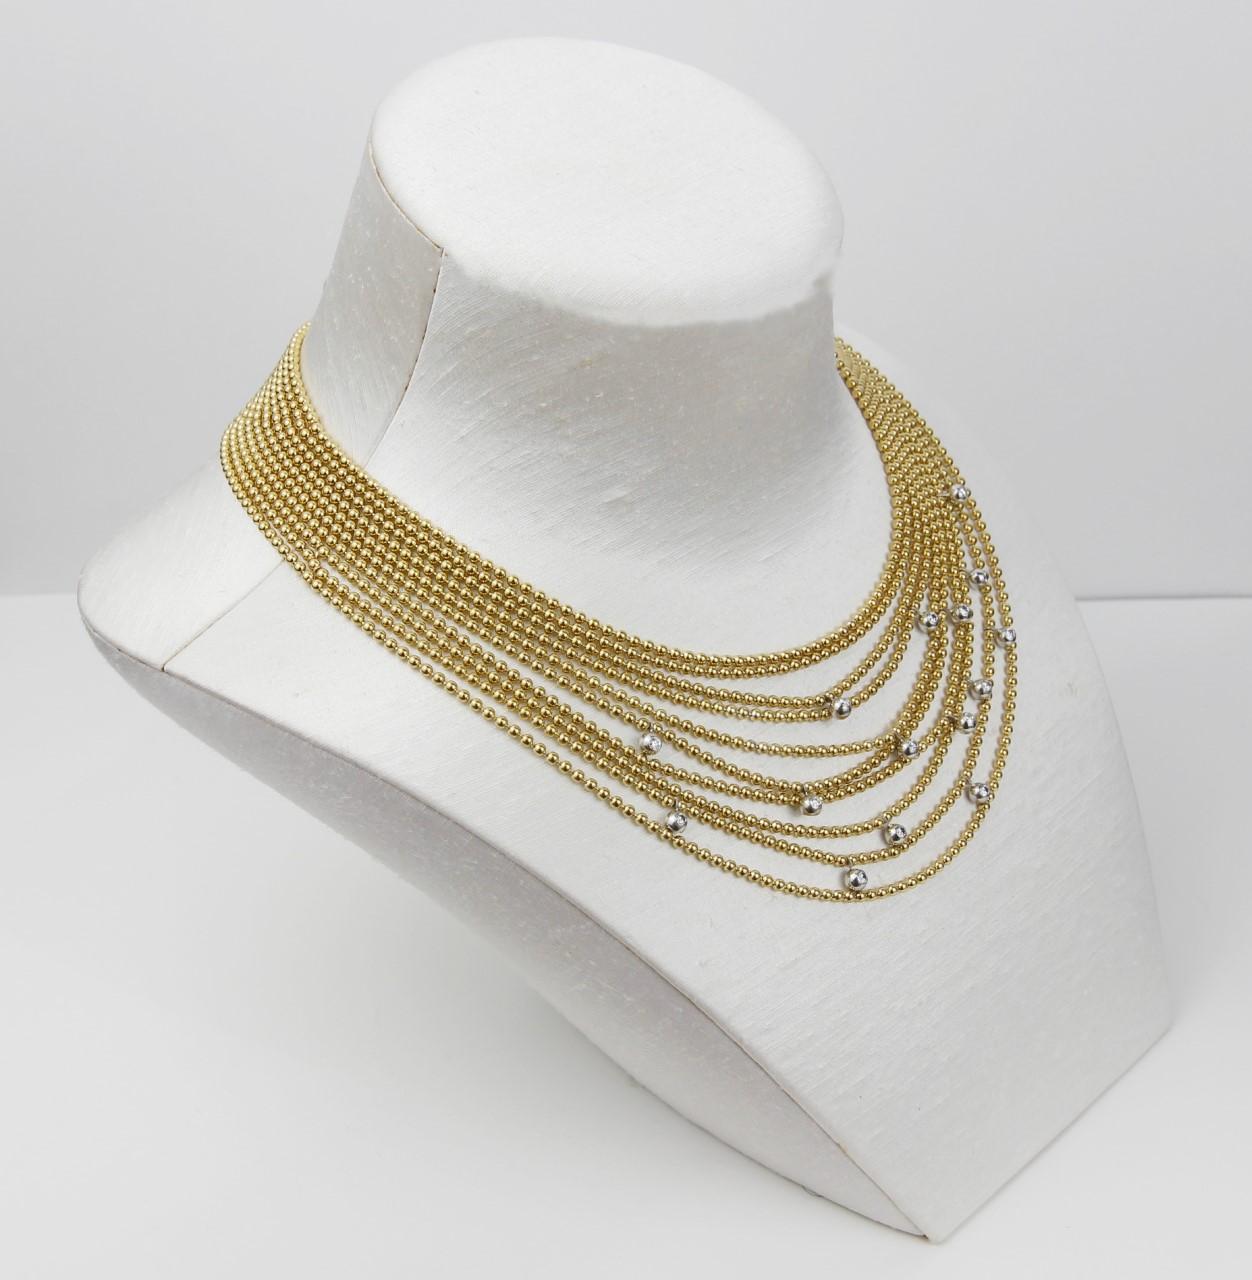 Cartier Draperie De Décolleté Diamond 18K Yellow Gold Multi Link Choker Necklace
The House of Cartier presents their Collection Draperie de Décolleté circa 1930s.
This magnificent piece is crafted in solid 18K yellow gold beads, gradually presented